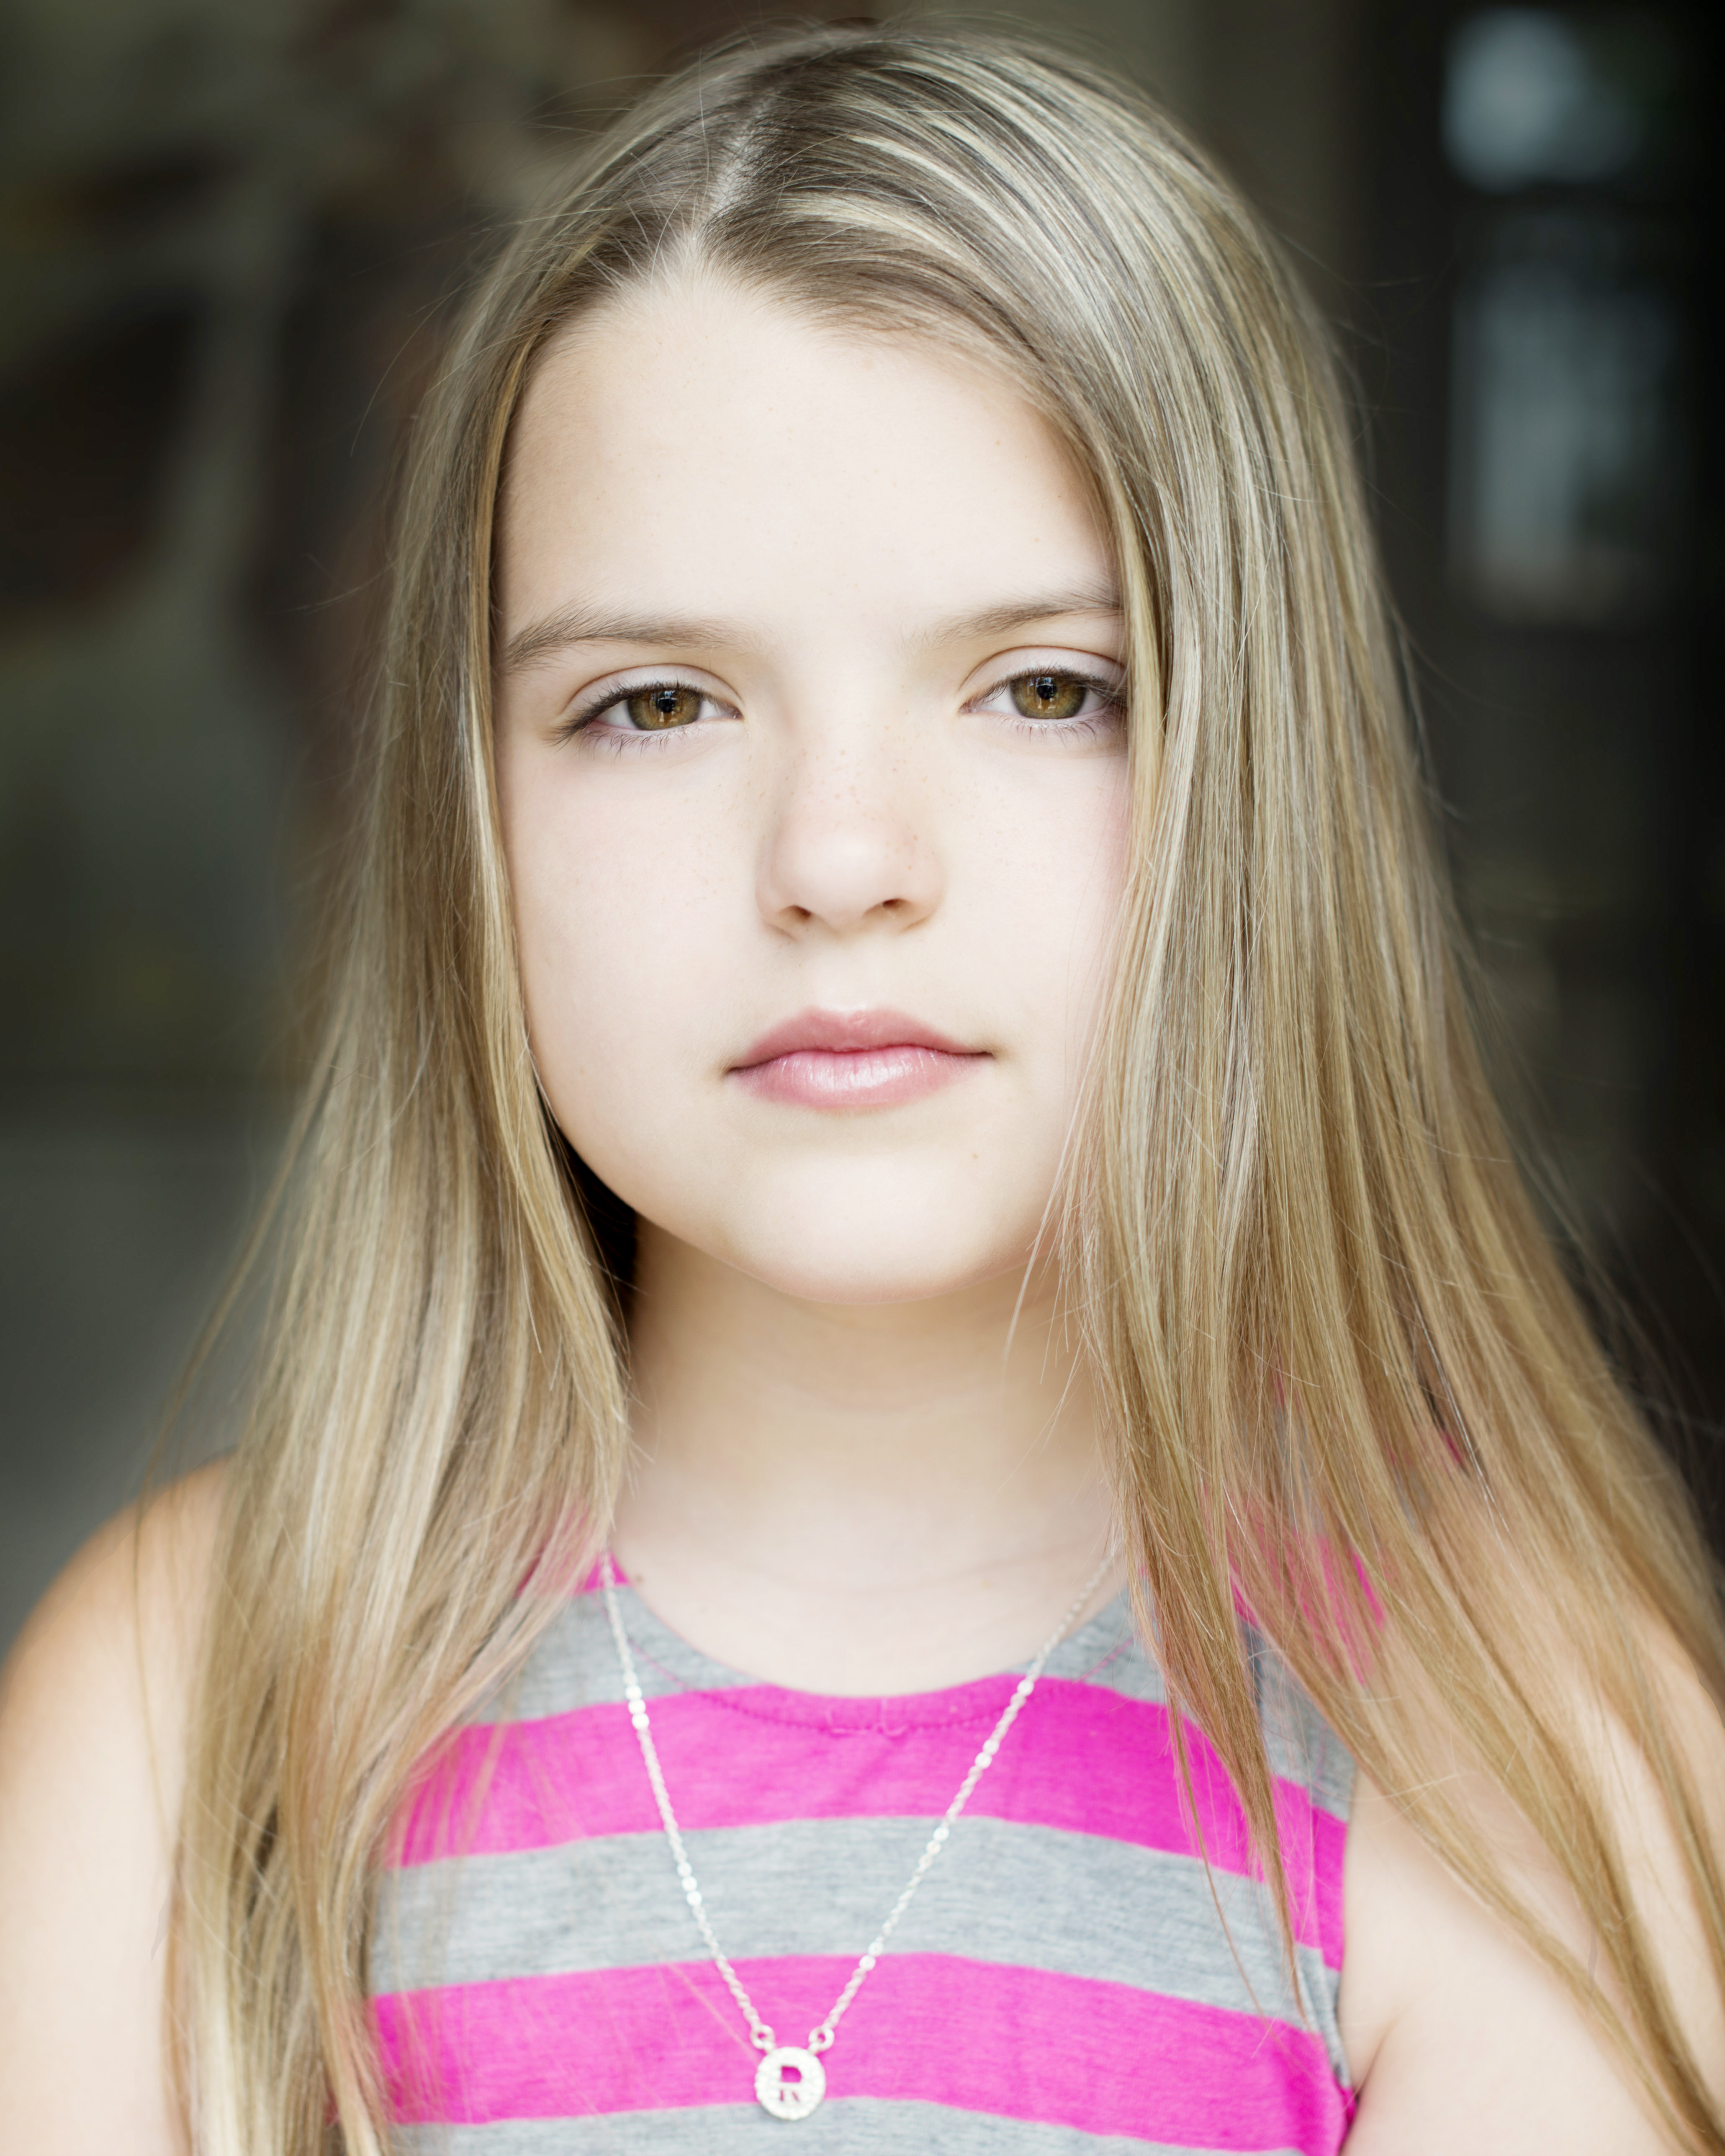 Rhys Fleming is a young actress who started her career in May 2014. She has been cast in Mattel, Crayola & Nintendo commercials and recently filmed an episode in the Minority Report series.